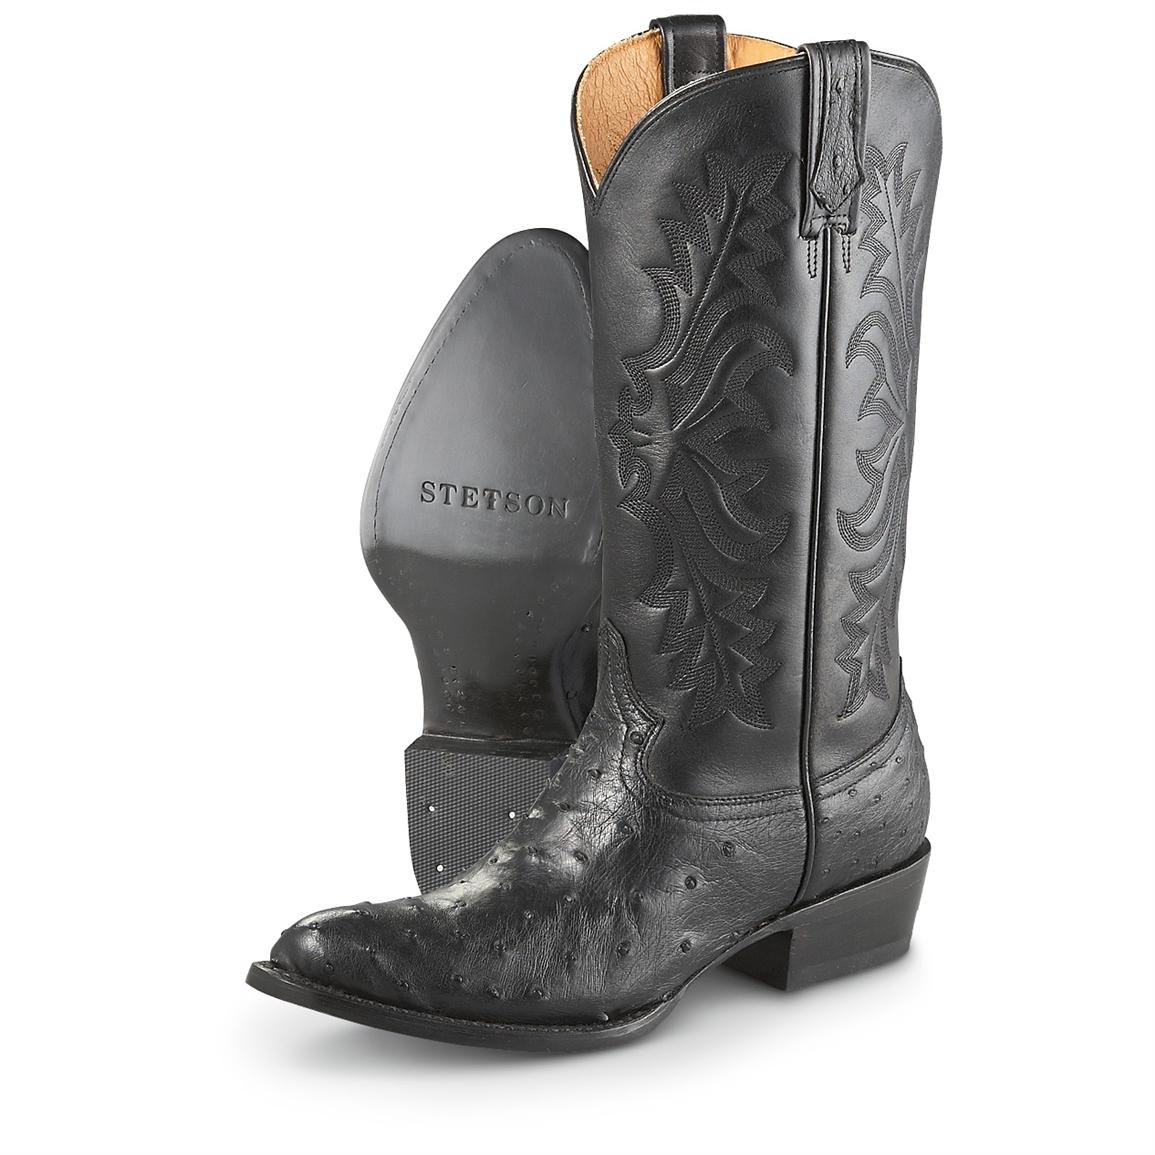 Men's Stetson® Full-quill Ostrich Leather Cowboy Boots, Black ...